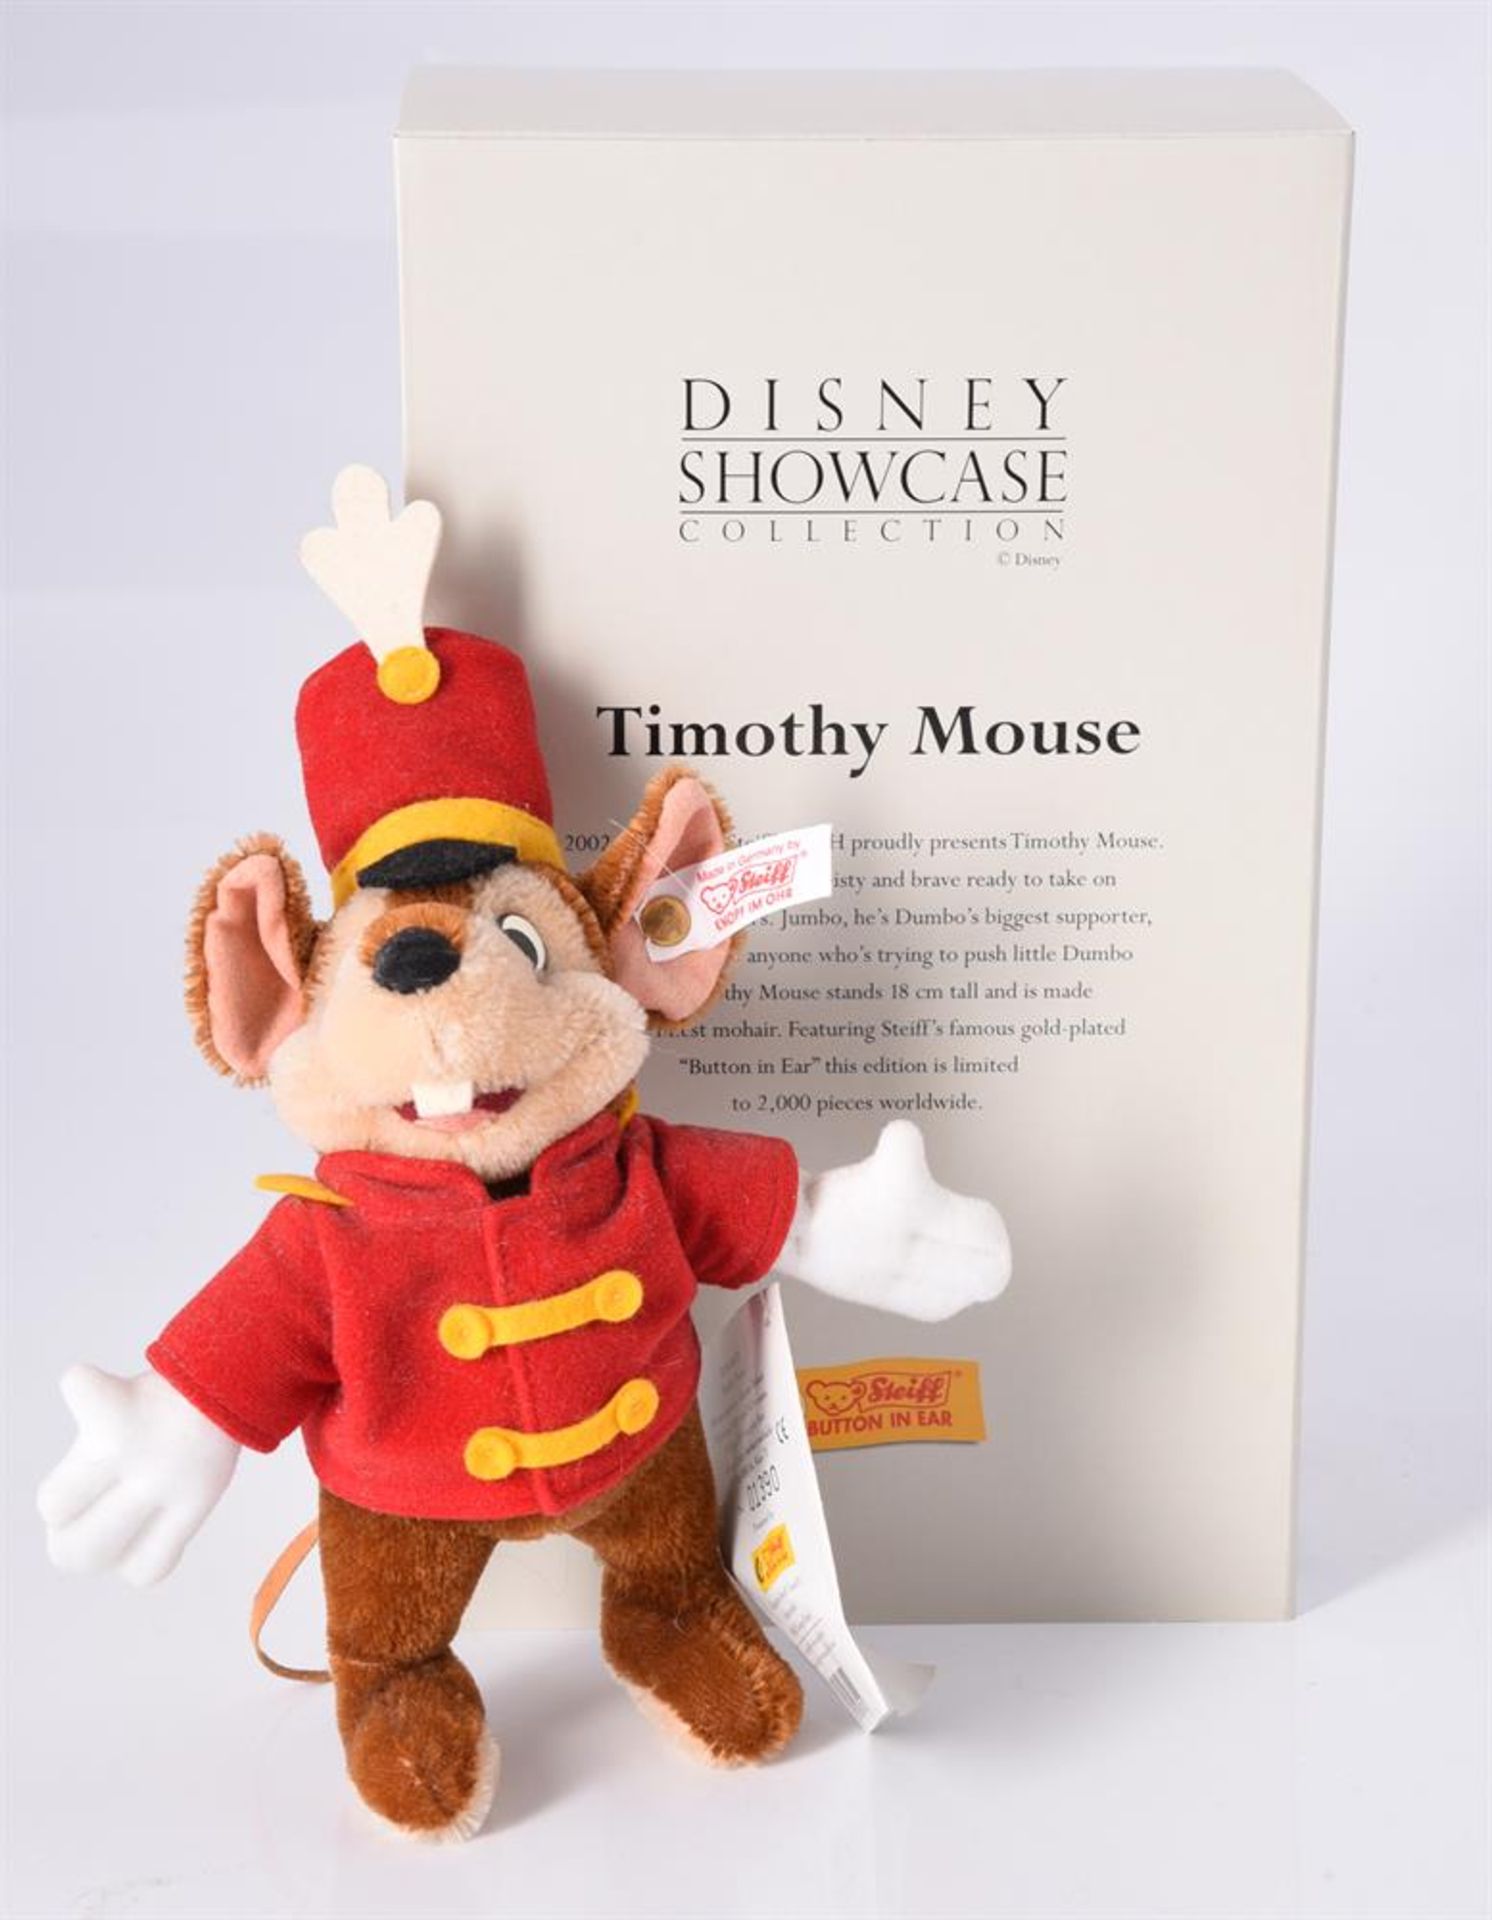 STEIFF, DUMBO AND TIMOTHY MOUSE, 00556 and 01390, DISNEY SHOWCASE COLLECTION, CIRCA 2002 - Image 7 of 7